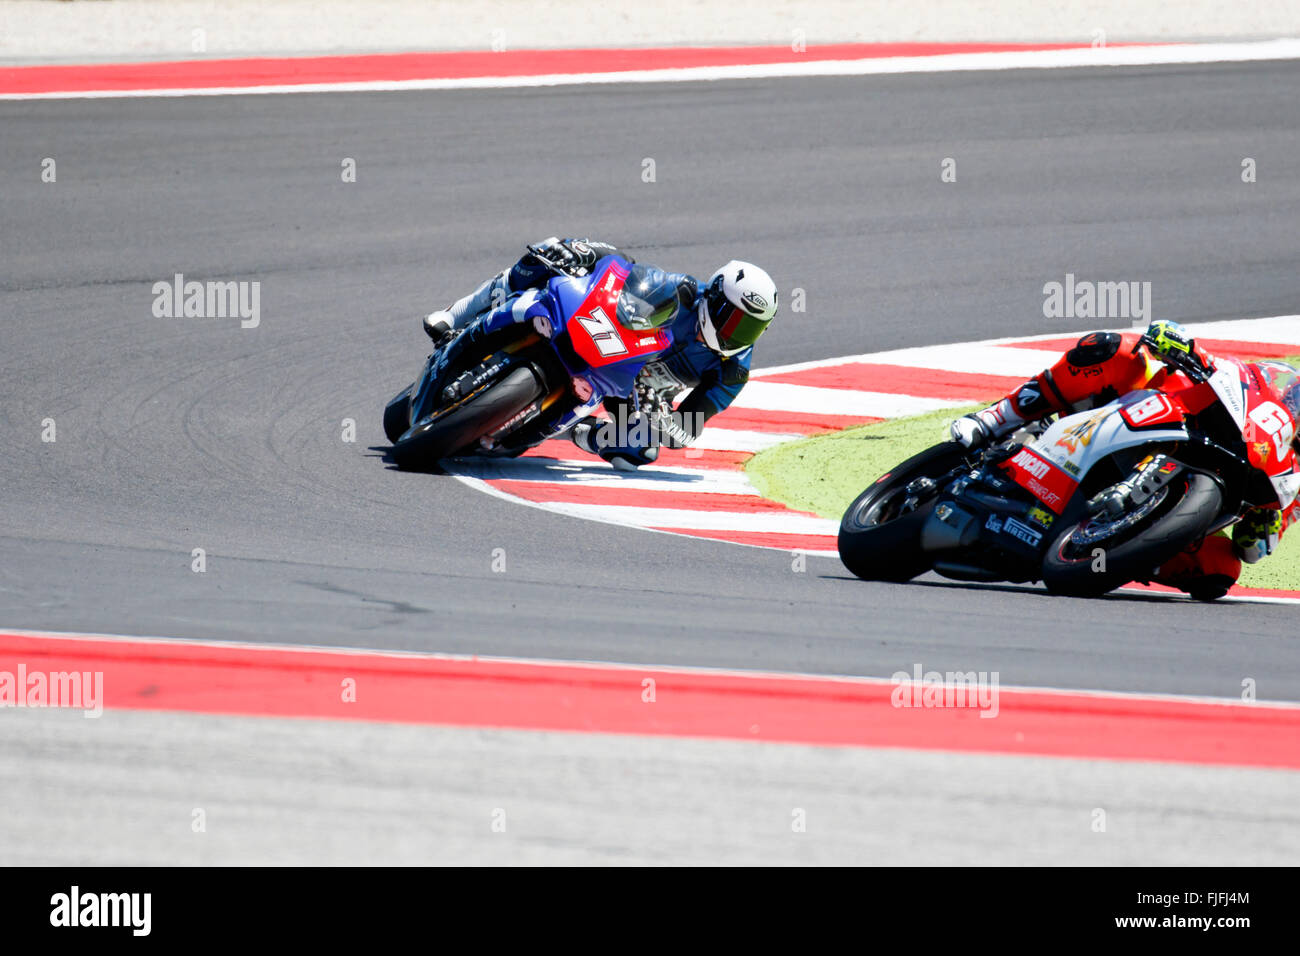 Misano Adriatico, Italy - June 21, 2015: Yamaha YZF R1 of MG Competition Team, driven by BERGMAN Christoffer Stock Photo